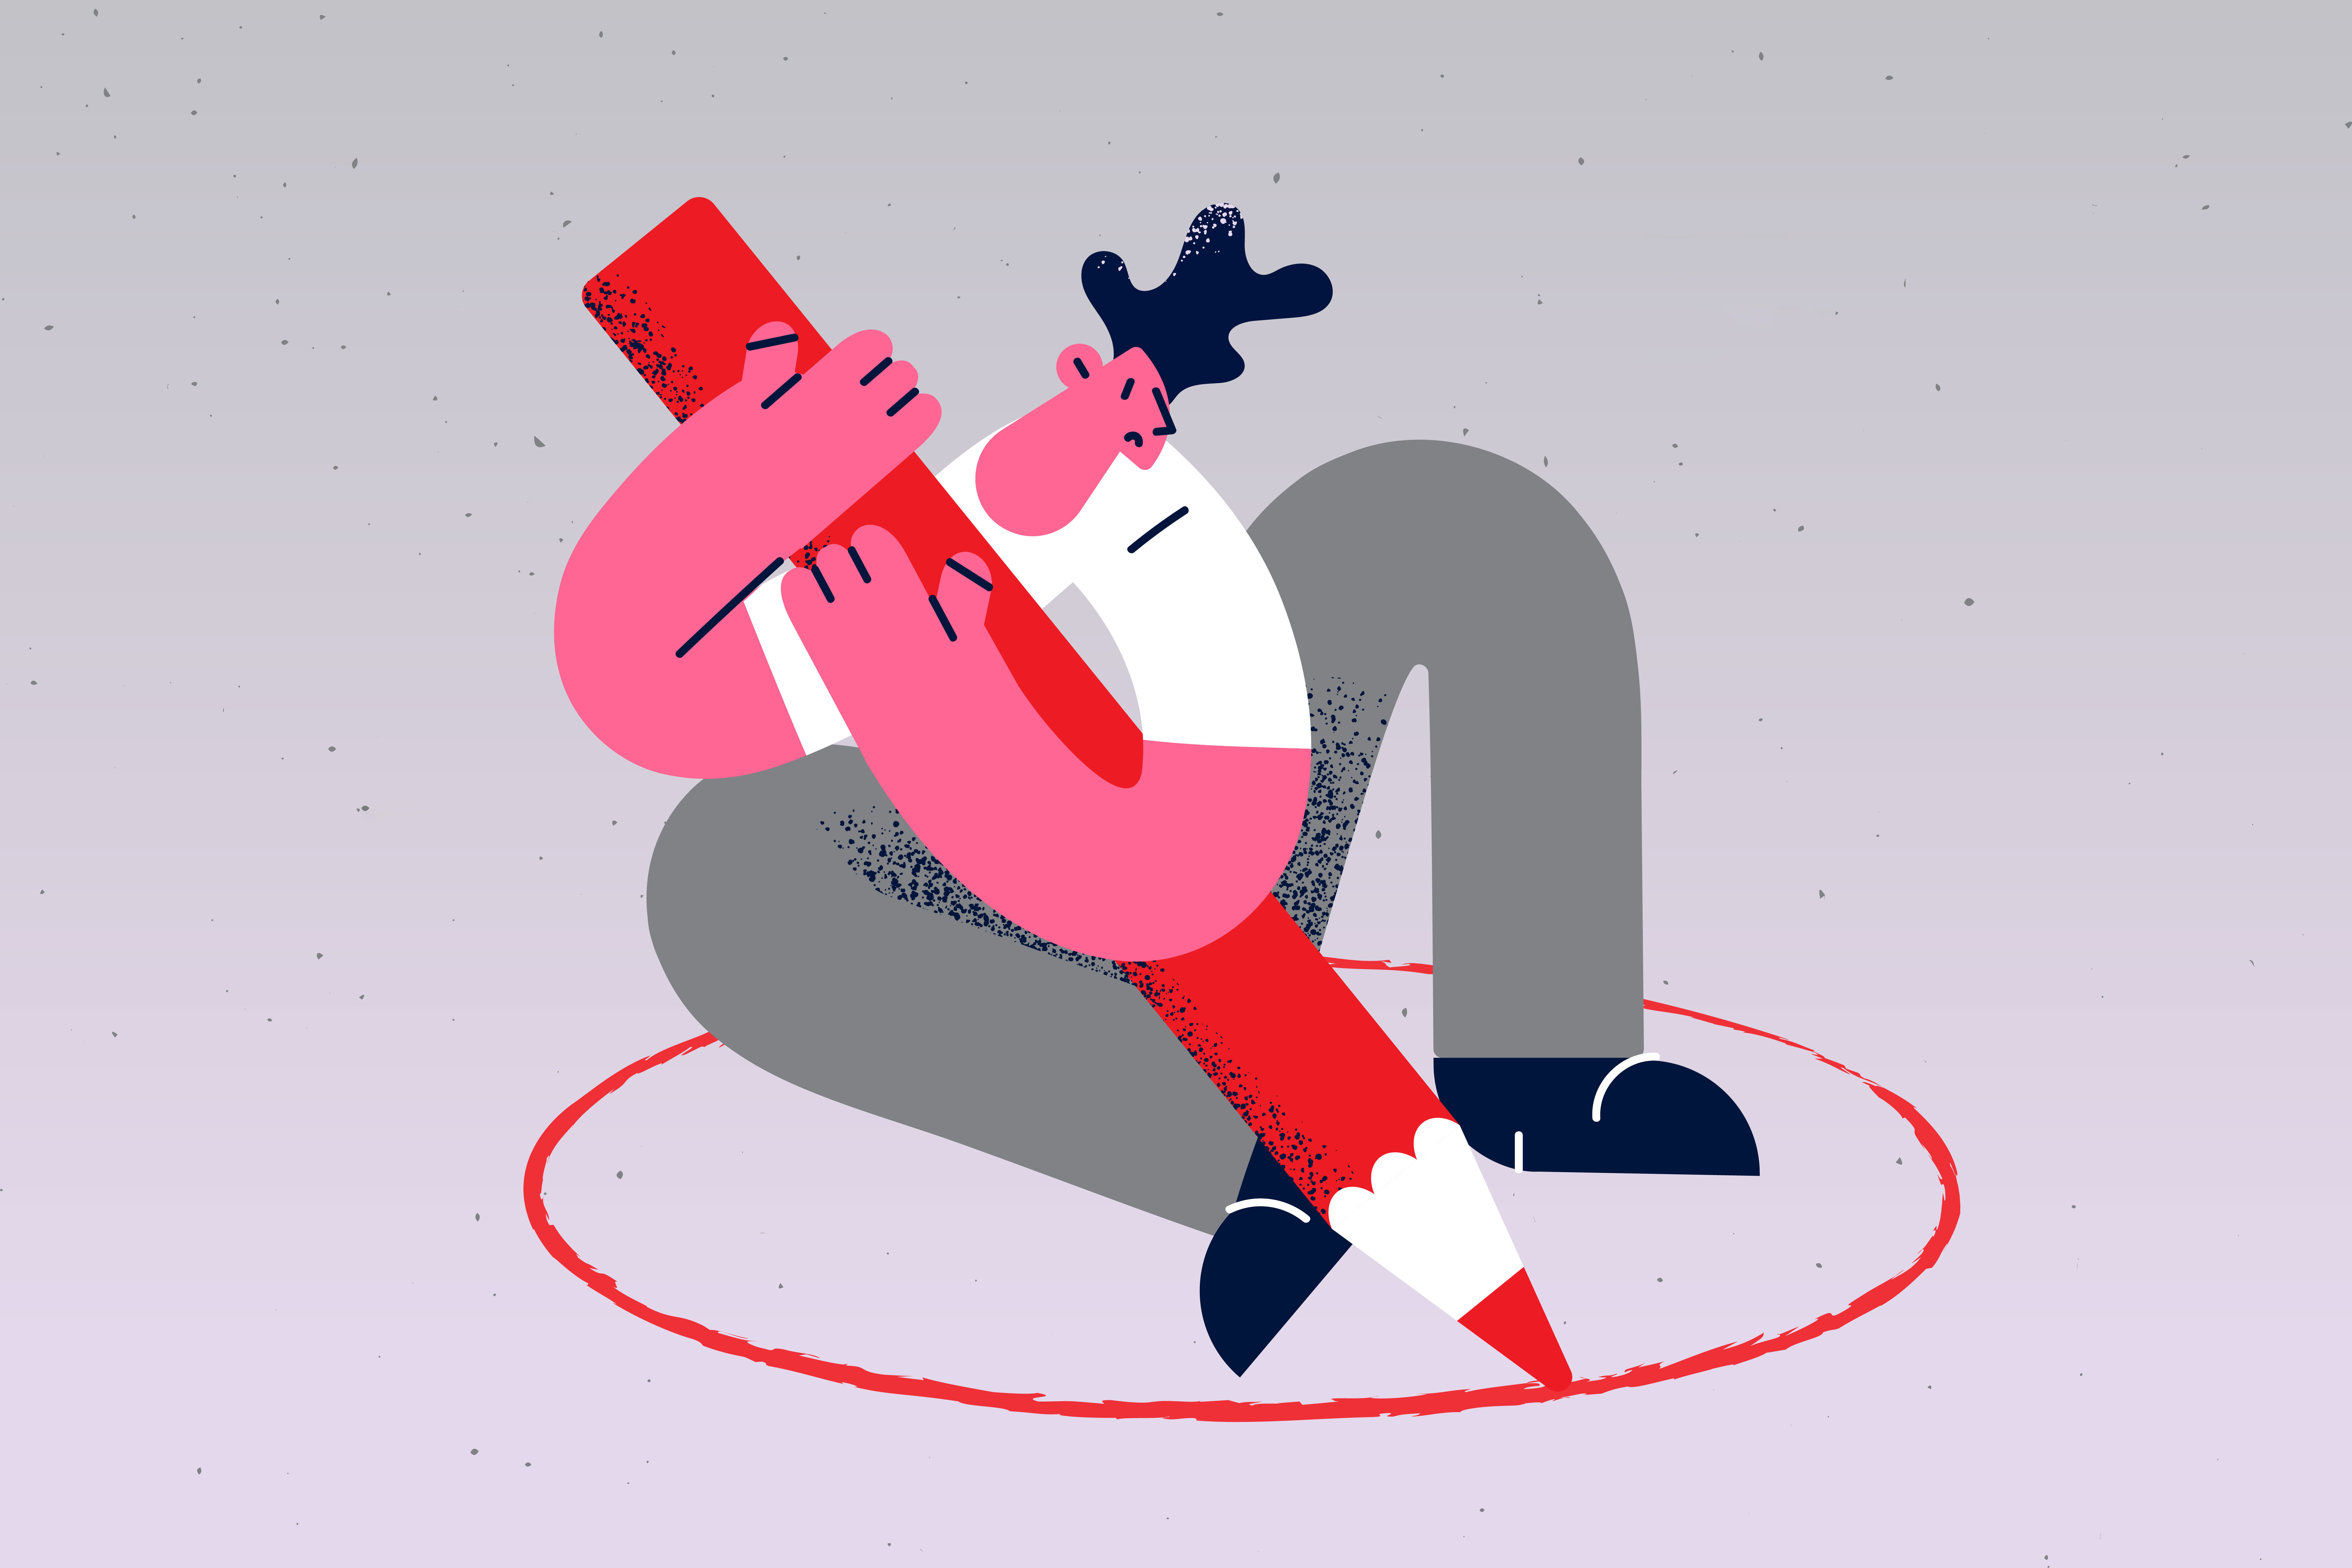 An illustration of a person drawing a circle around their body with a large red pencil.